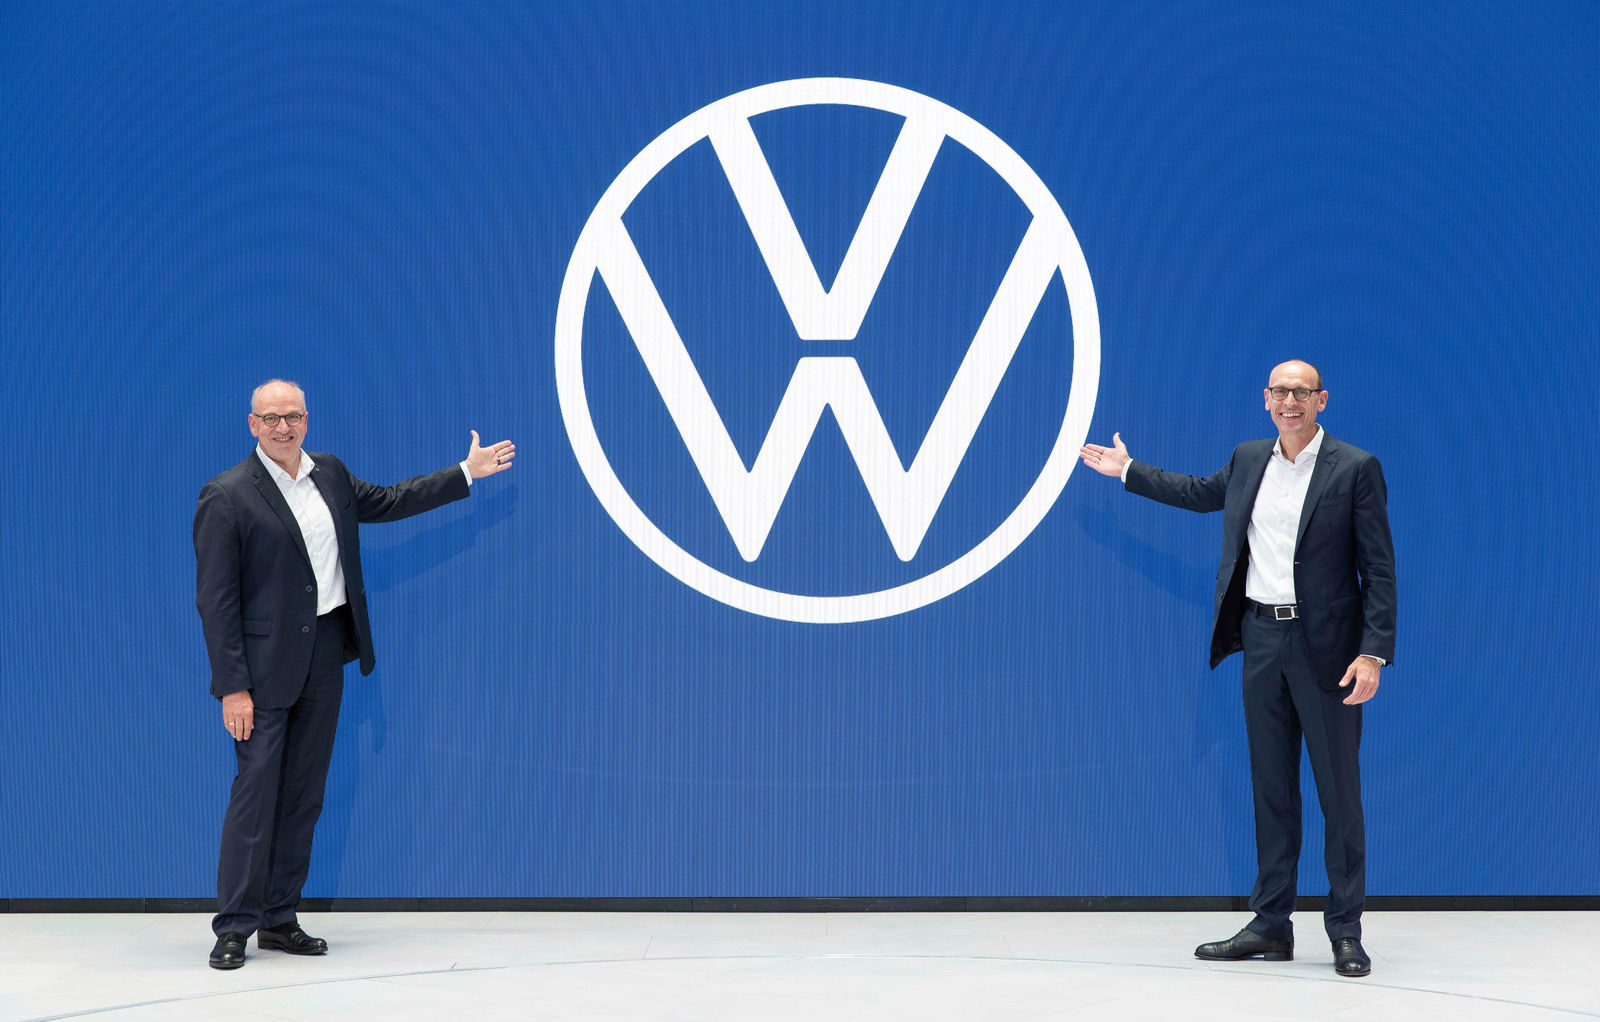 Jürgen Stackmann, Member of the Board of Management of the Volkswagen Passenger Cars brand with responsibility for ‘Sales, Marketing and After Sales’ and Ralf Brandstätter, Chief Operating Officer of the Volkswagen Passenger Cars brand